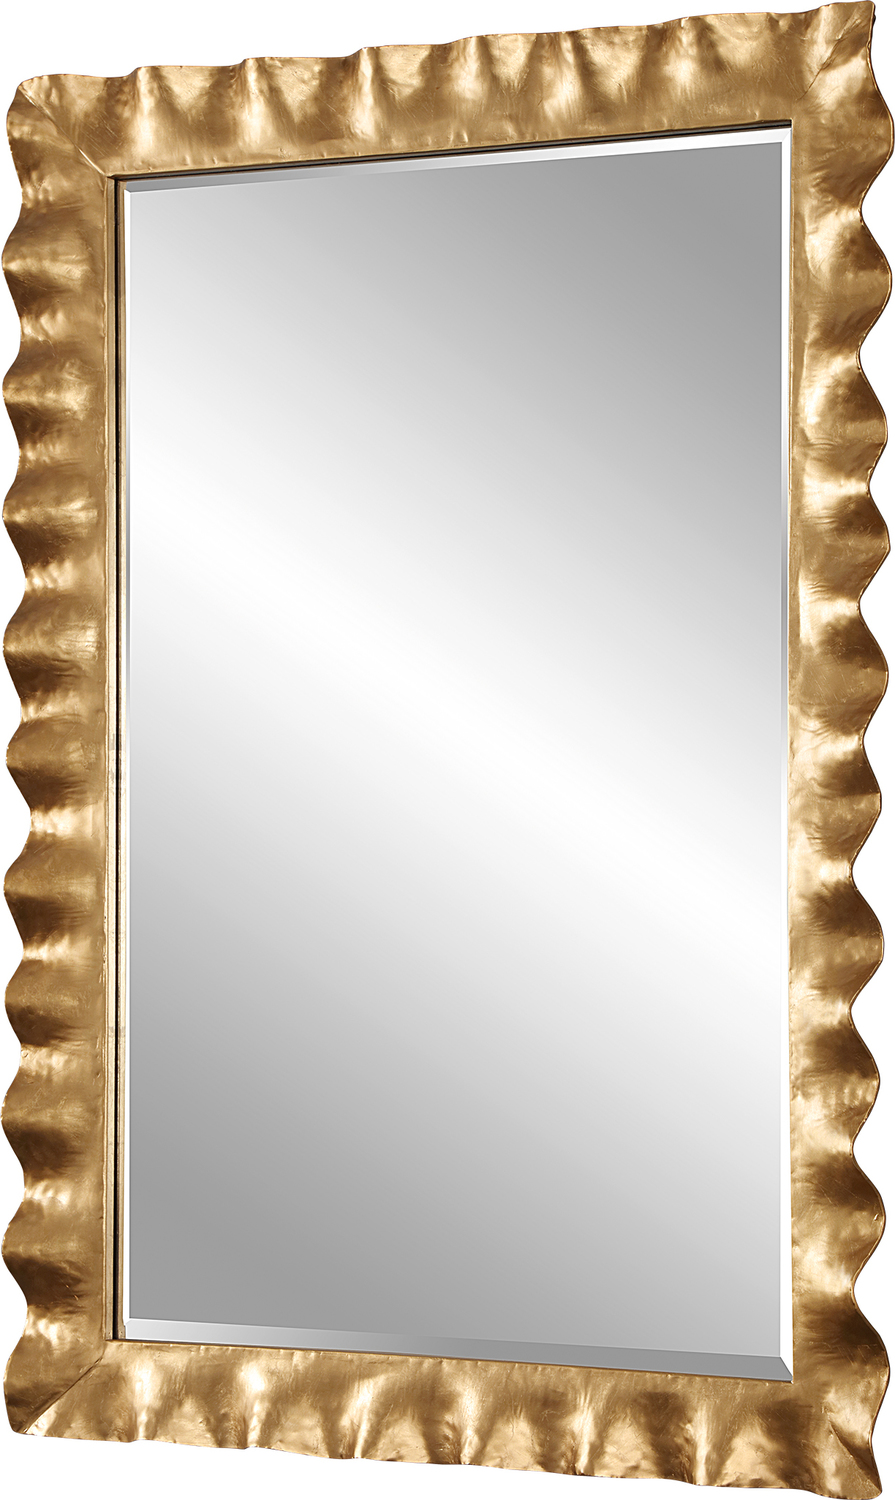 utter most Uttermost Scalloped Gold Mirror This Mirror Features A Hand Forged Metal Frame Finished In A Lightly Antiqued Gold Leaf With An Organic, Scalloped Edge Design. A Generous 1 1/4" Bevel Is Added To This Piece, Which May Be Hung Horizontal Or Vertical.